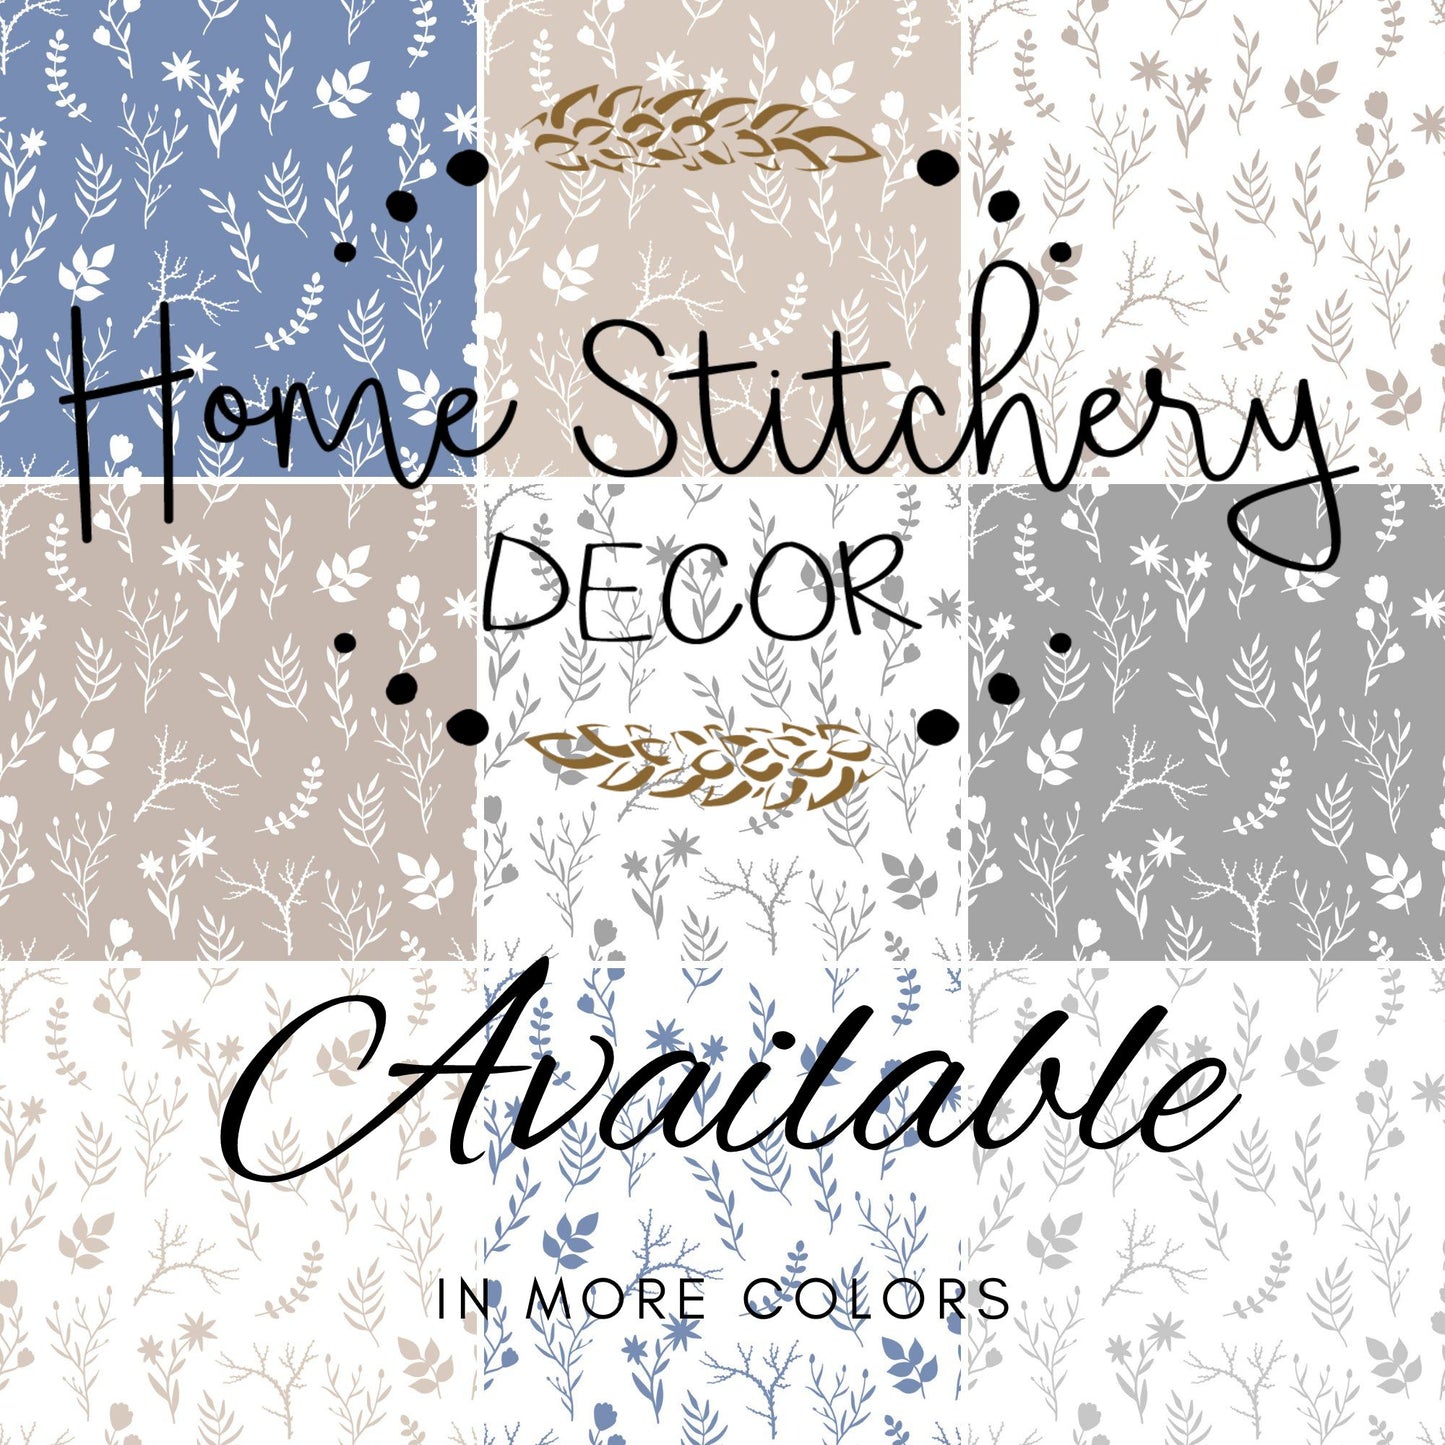 Color options for modern floral print comforter, designed exclusively by Home Stitchery Decor. Part of a mix and match collection of modern farmhouse home decor. 10 color options to choose from. Redecorate the easy way with casual farmhouse elegant designs. Be sure to check out the Home Stitchery Decor YouTube Channel.